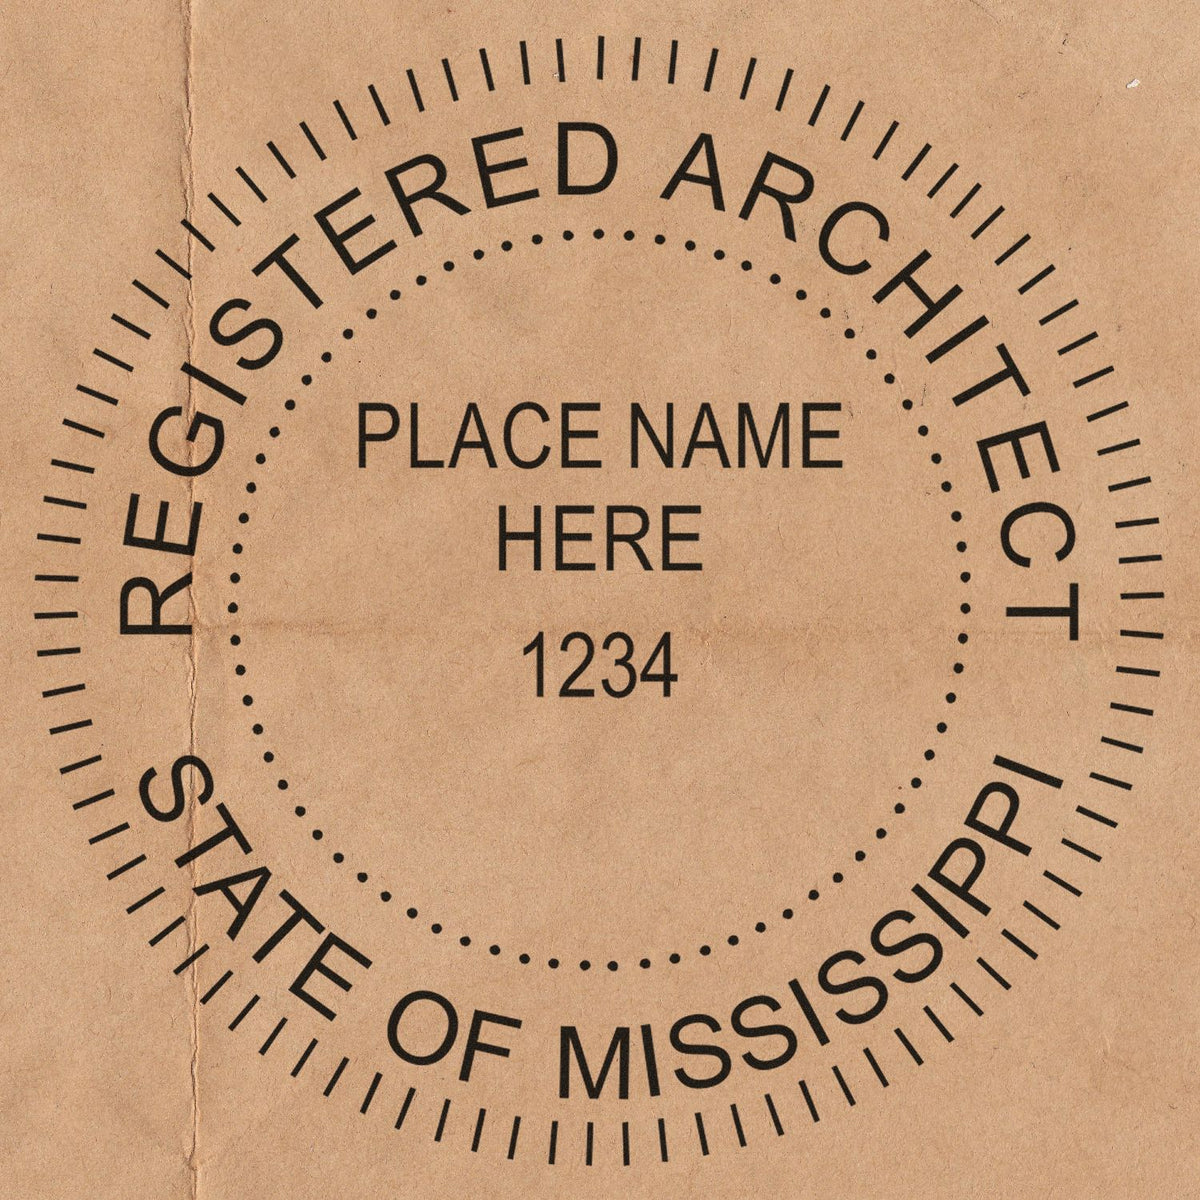 Slim Pre-Inked Mississippi Architect Seal Stamp in use photo showing a stamped imprint of the Slim Pre-Inked Mississippi Architect Seal Stamp